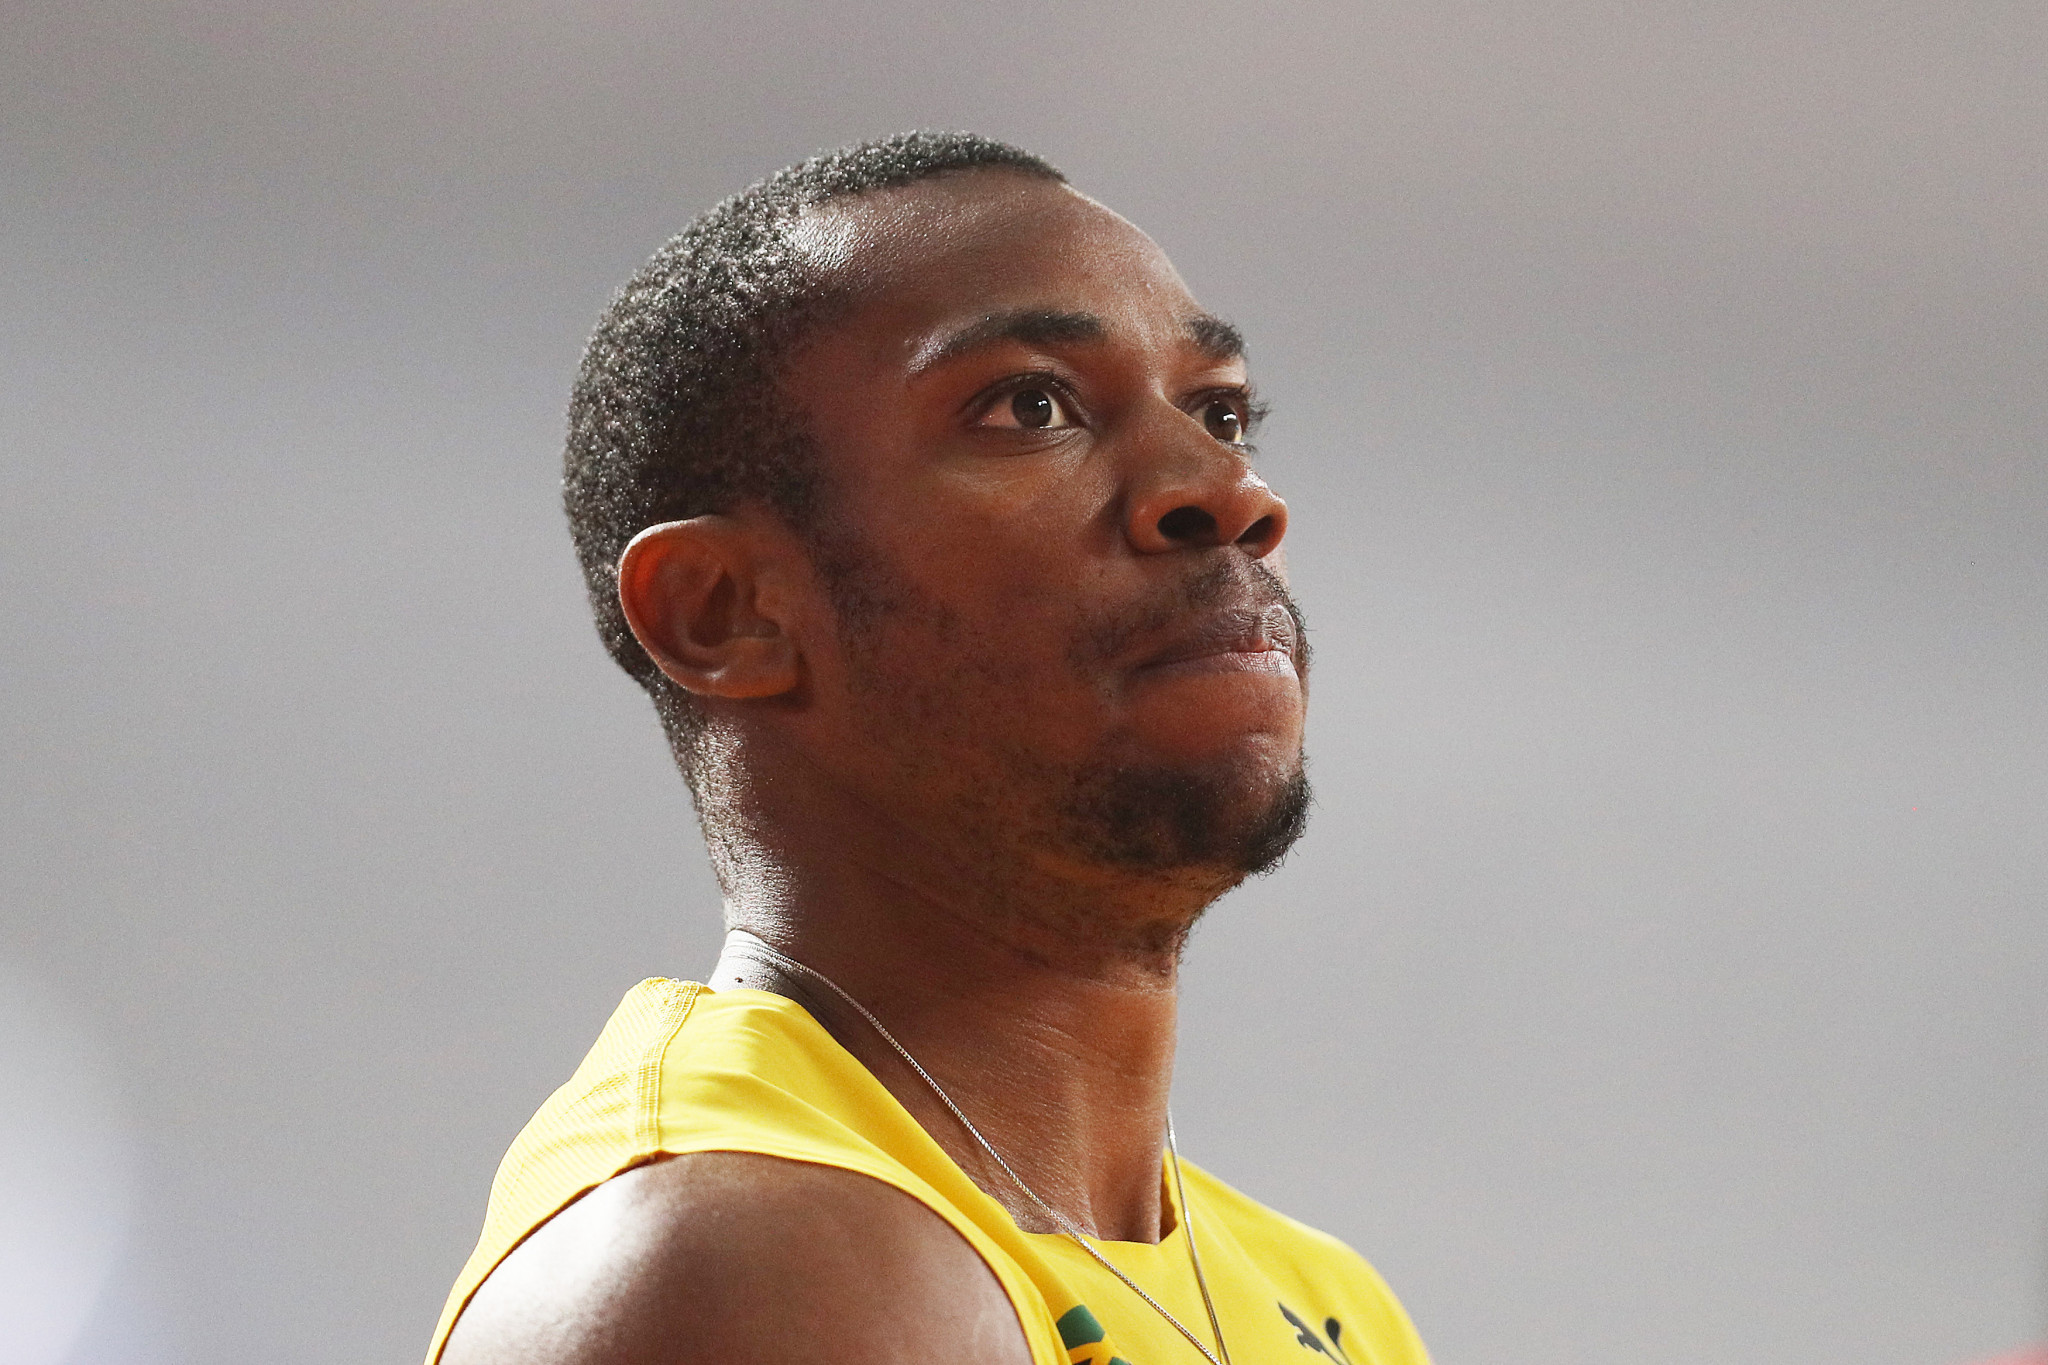 Jamaican sprinter Blake says he would rather miss Tokyo 2020 than take COVID-19 vaccine